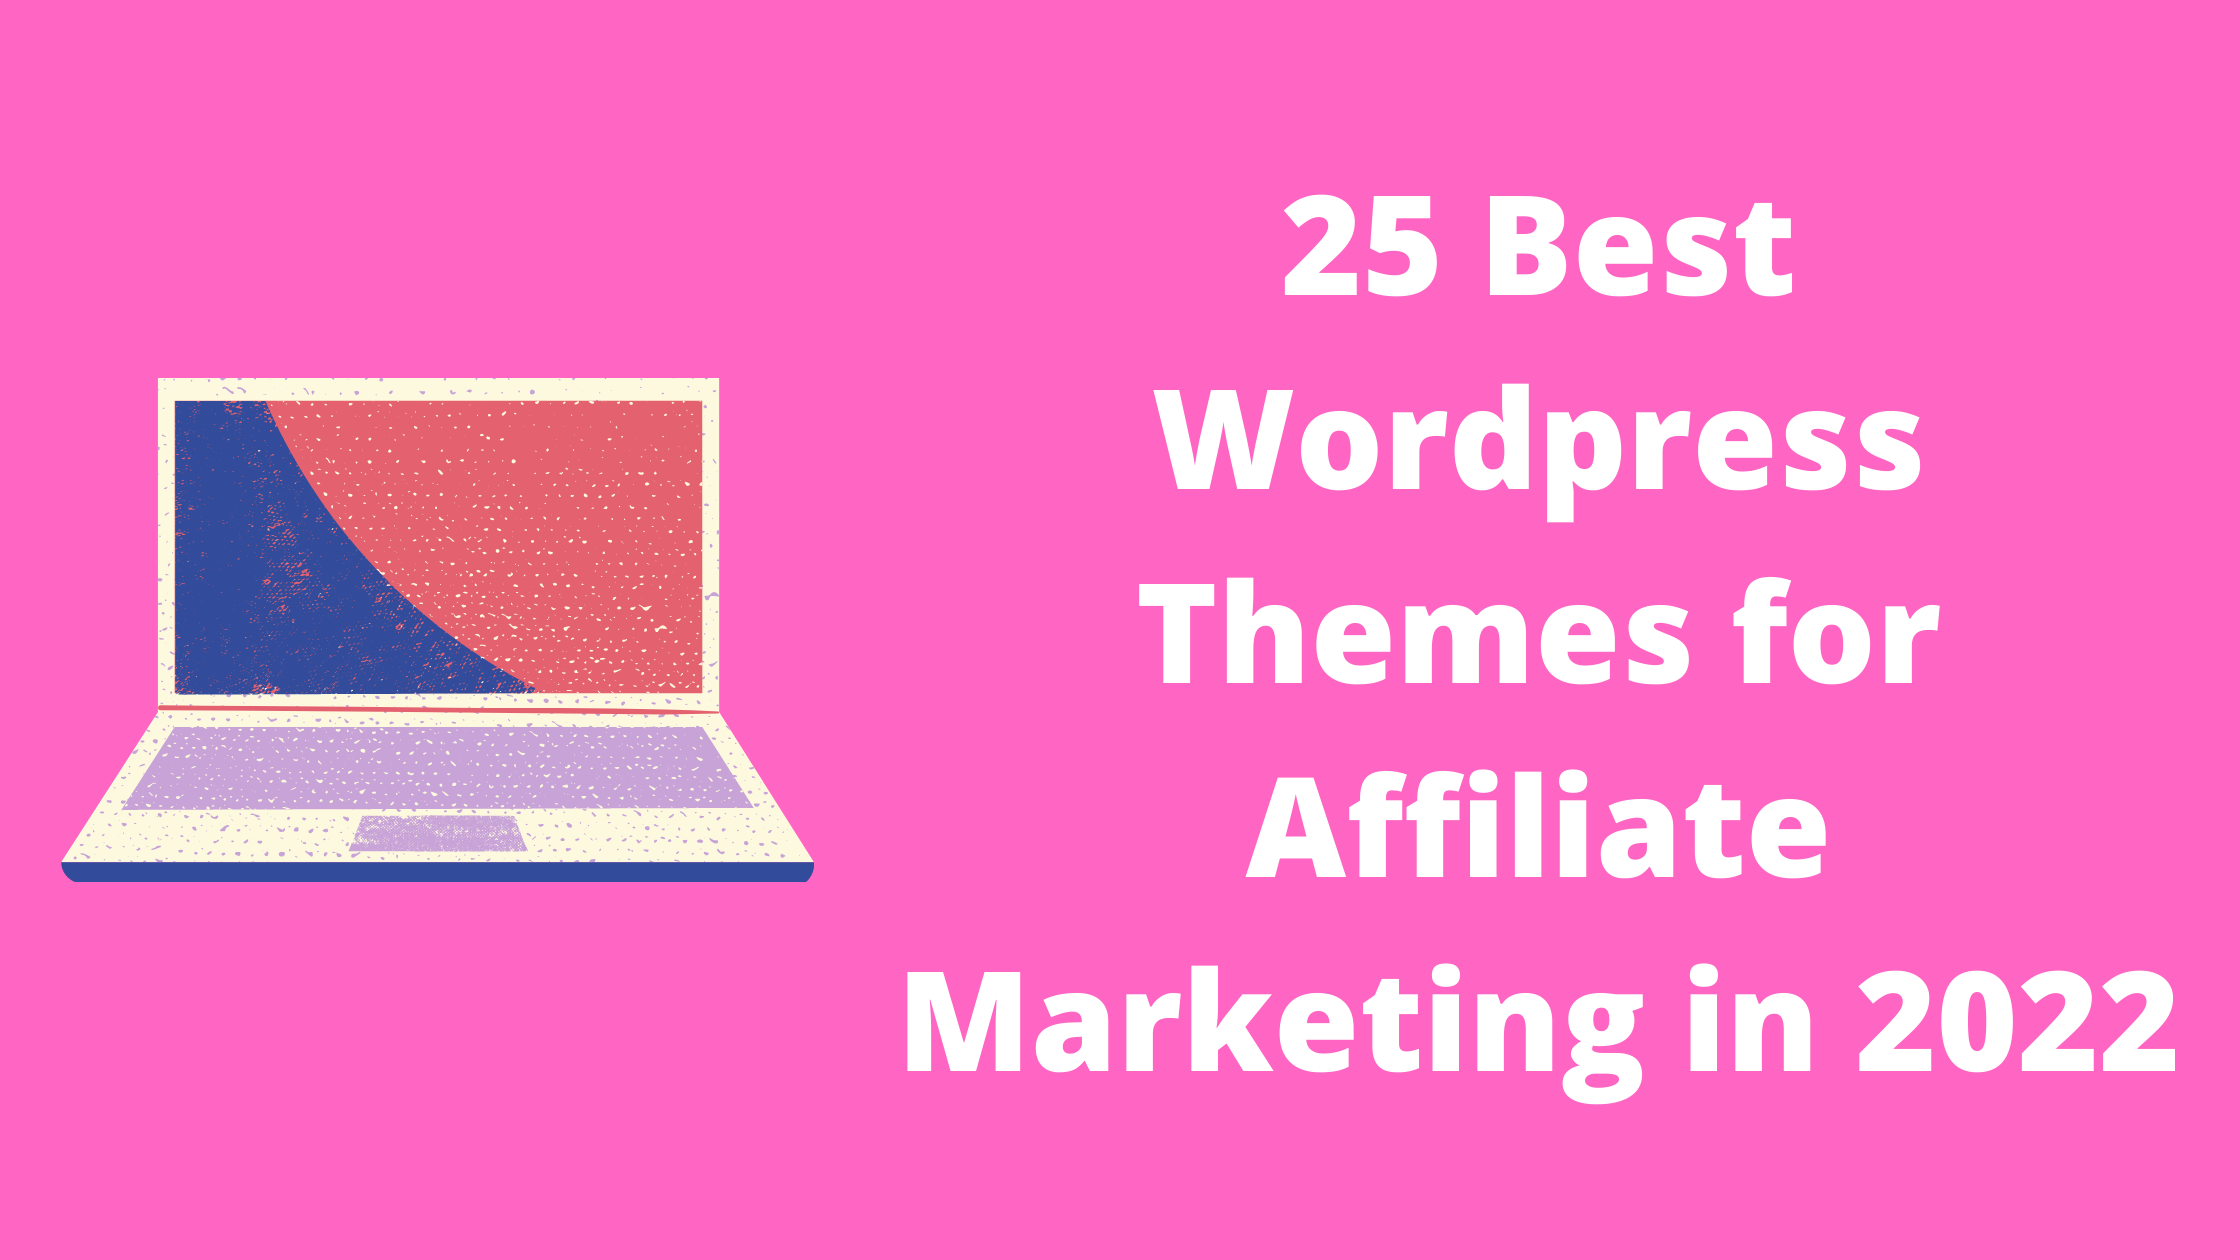 25 Best WordPress Themes for Affiliate Marketing in 2022